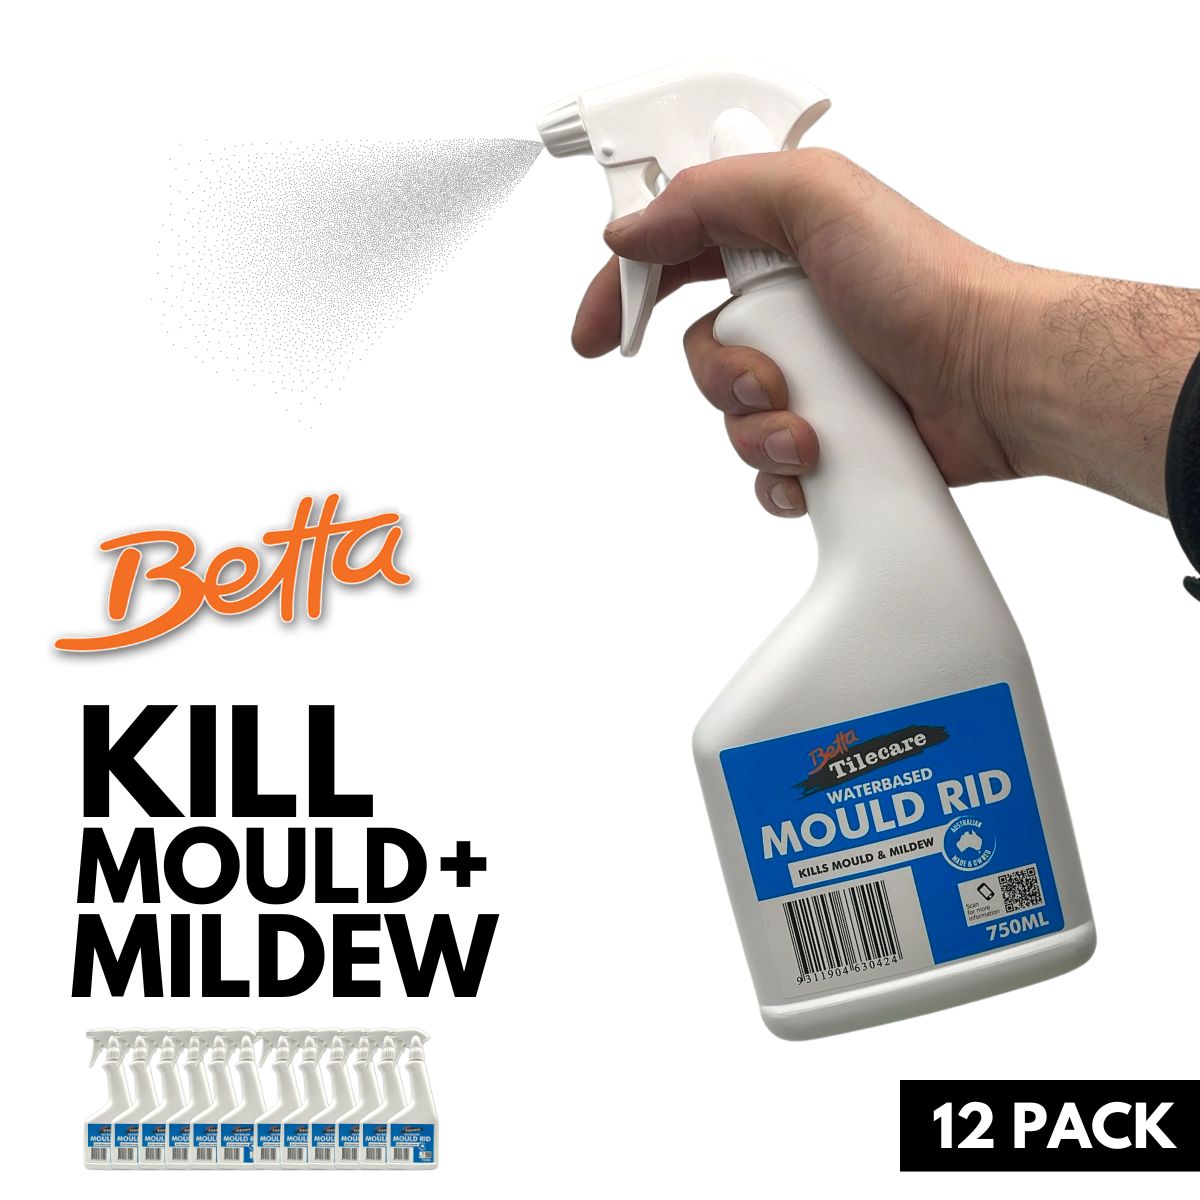 Betta Tilecare Water Based Mould & Mildew Killer, 750ml / 9 Litres total (Box of 12)